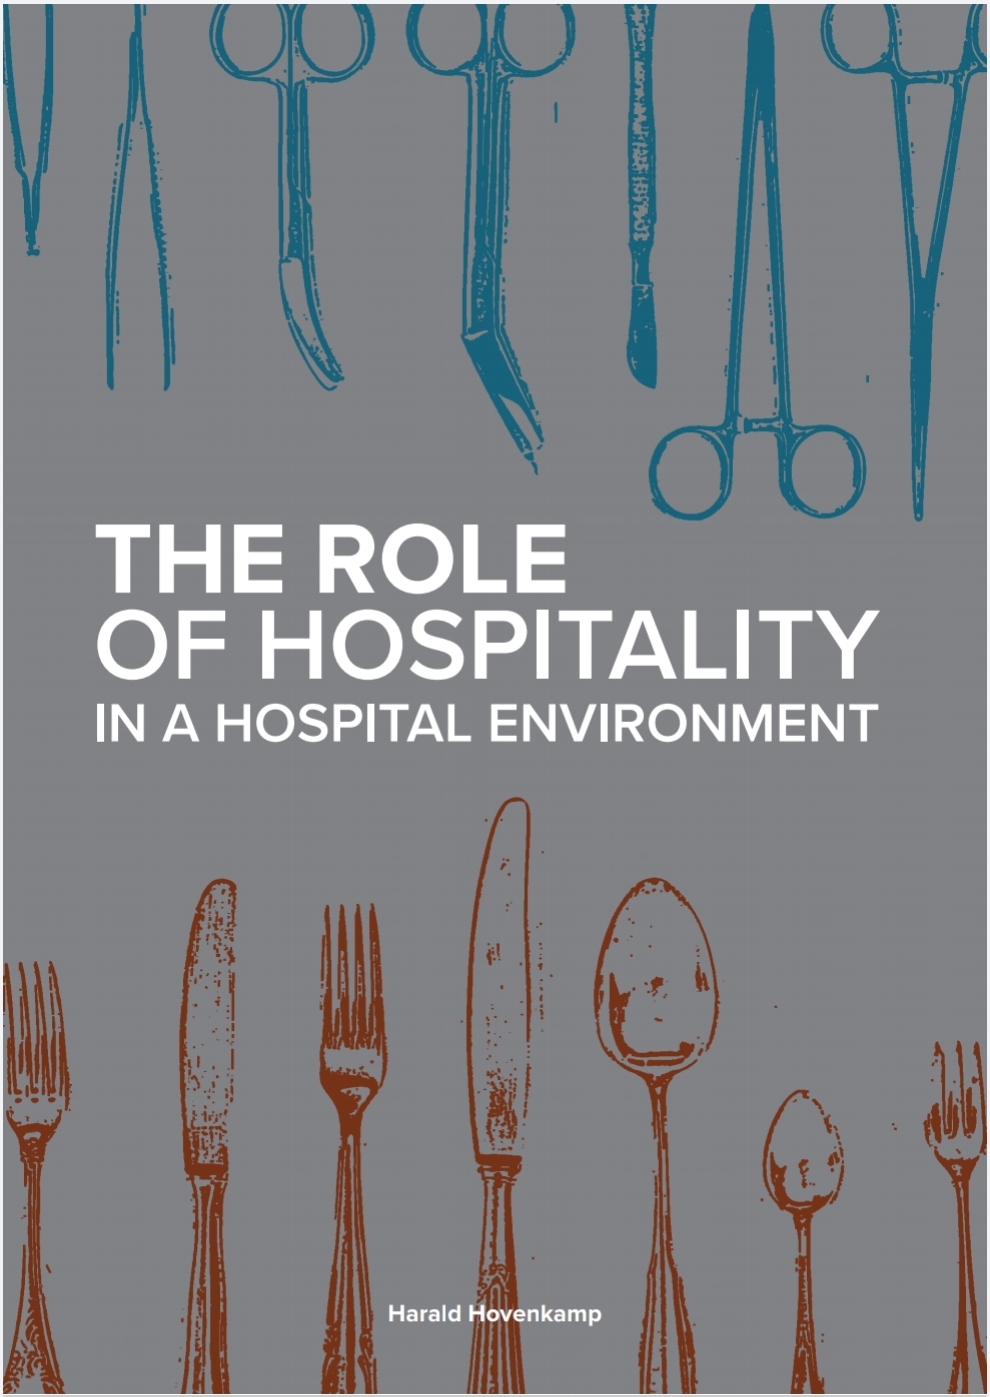 The role of hospitality in a hospital environment